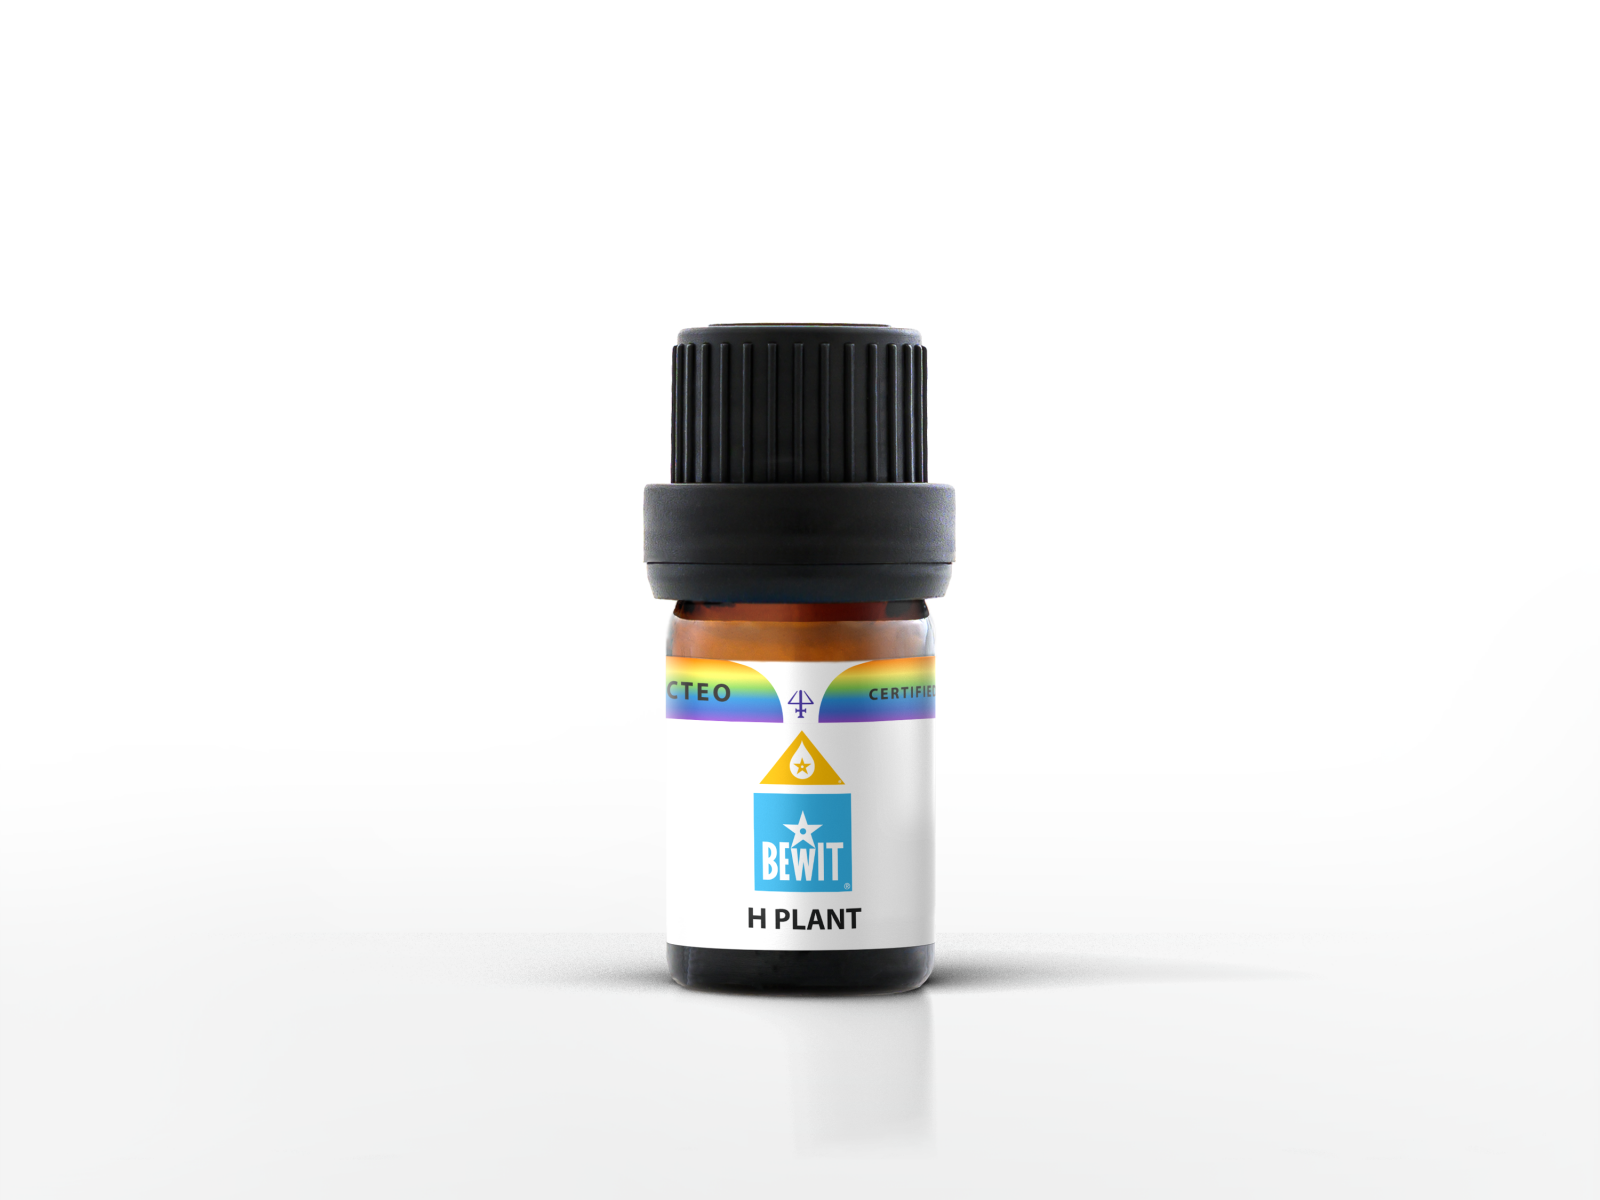 BEWIT H PLANT - Blend of essential oils - 2